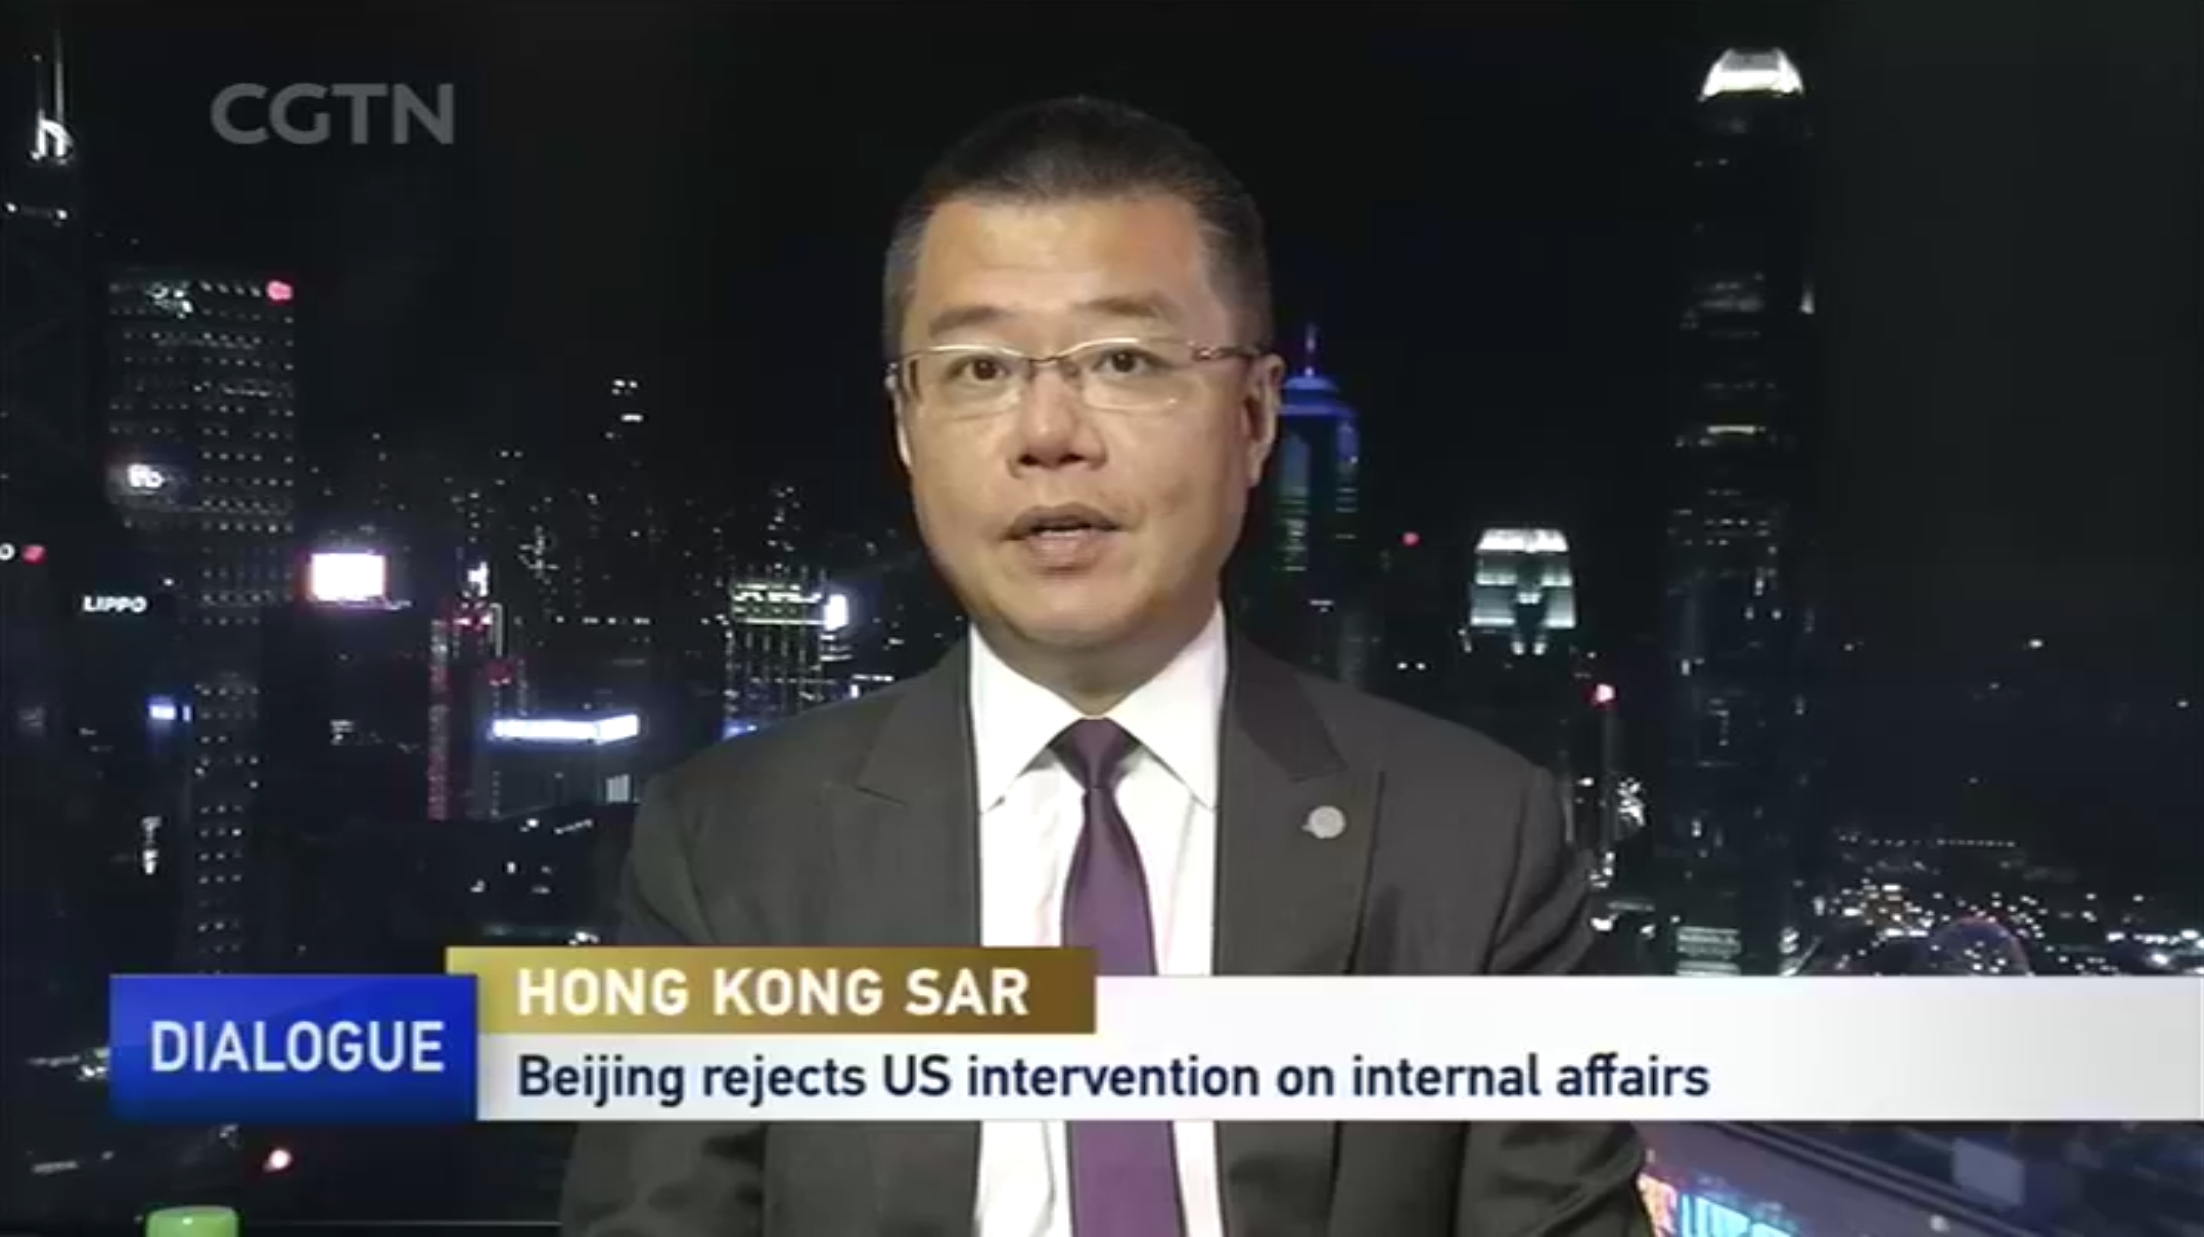 Dialogue: Beijing rejects US intervention on internal affairs